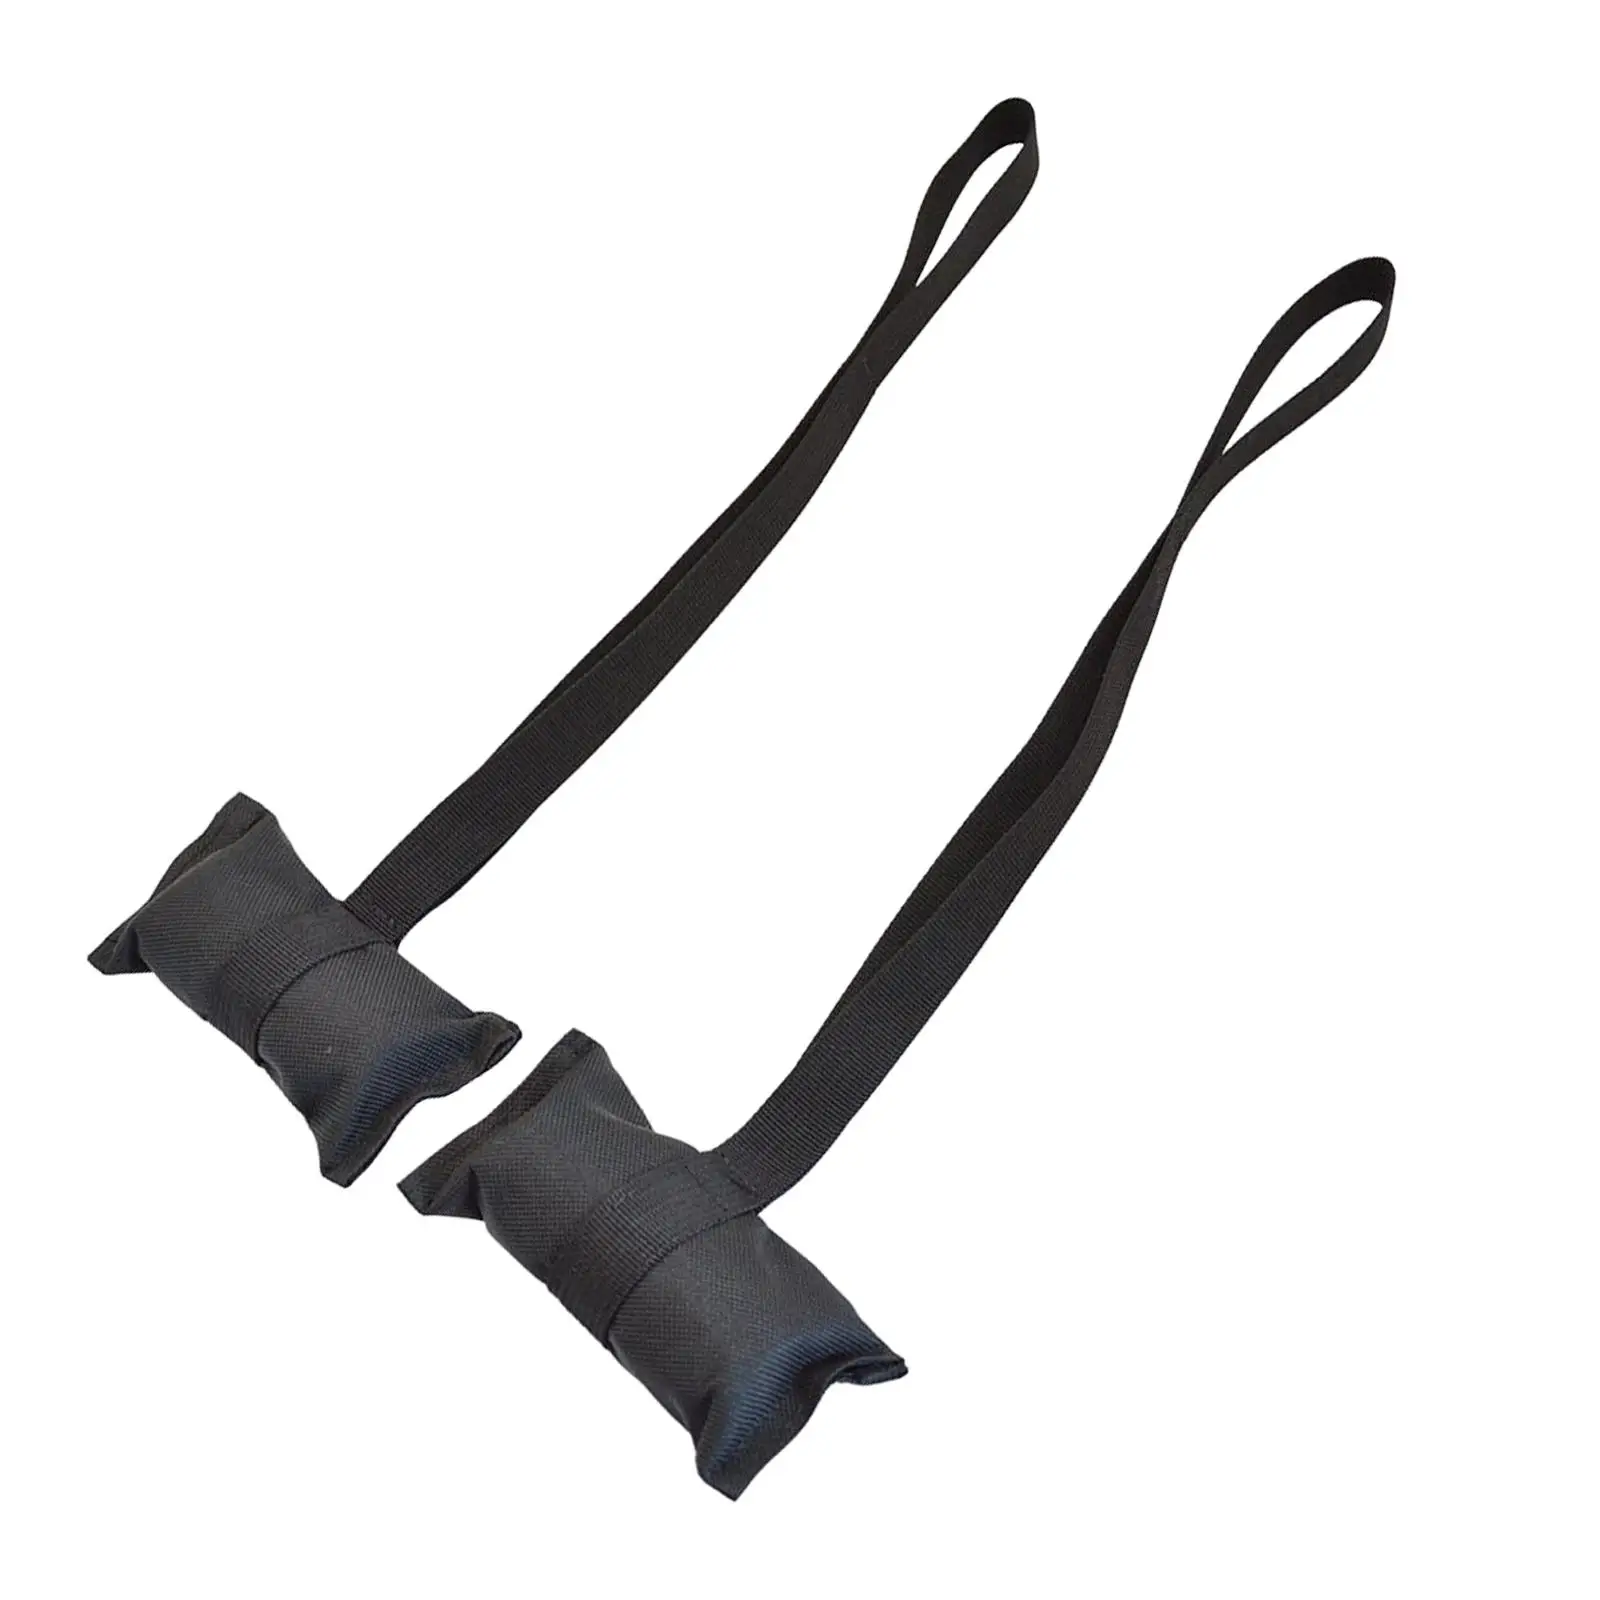 Anchors Tie Down Disassembly for Kayak Transport Bow Stern Car Hoods